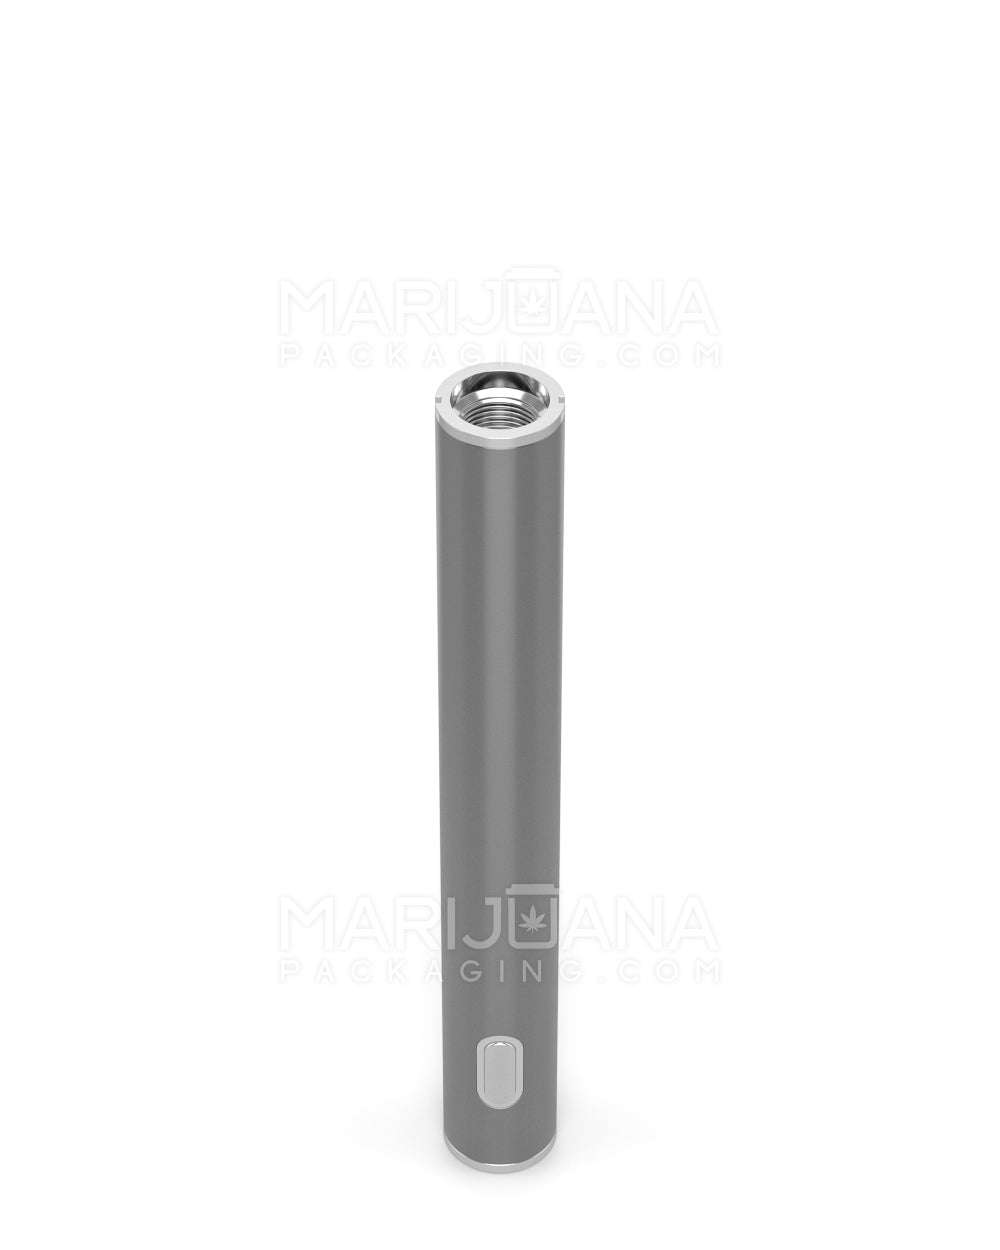 RAE | Instant Draw Activated Vape Battery | 320mAh - Silver - 640 Count - 3